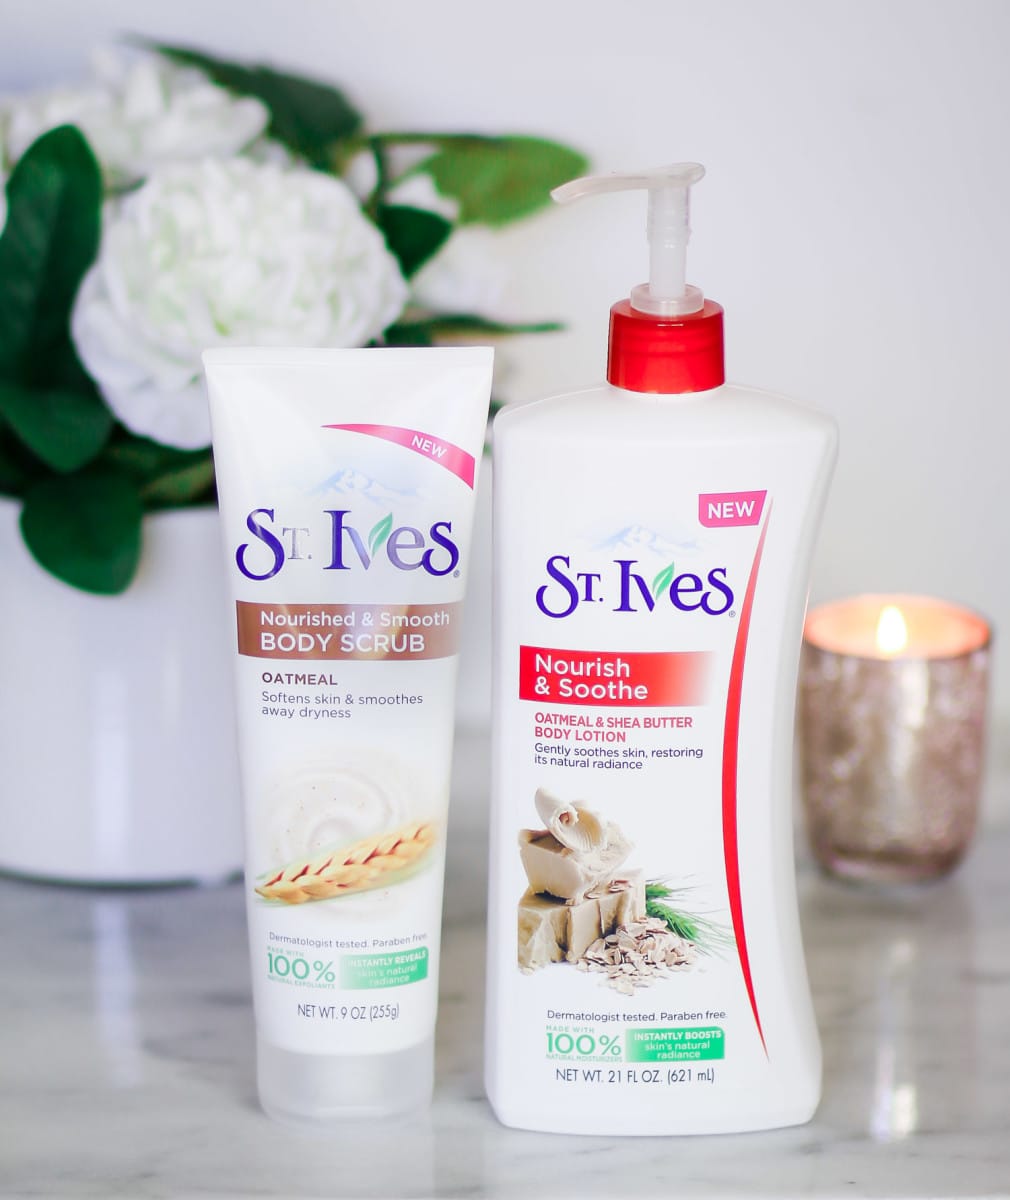 The St. Ives Nourished & Smooth Oatmeal Body Scrub and St. Ives Nourish & Soothe Oatmeal & Shea Butter Lotion are absolutely fantastic! Both products are soothing, moisturizing, and feature all natural ingredients!